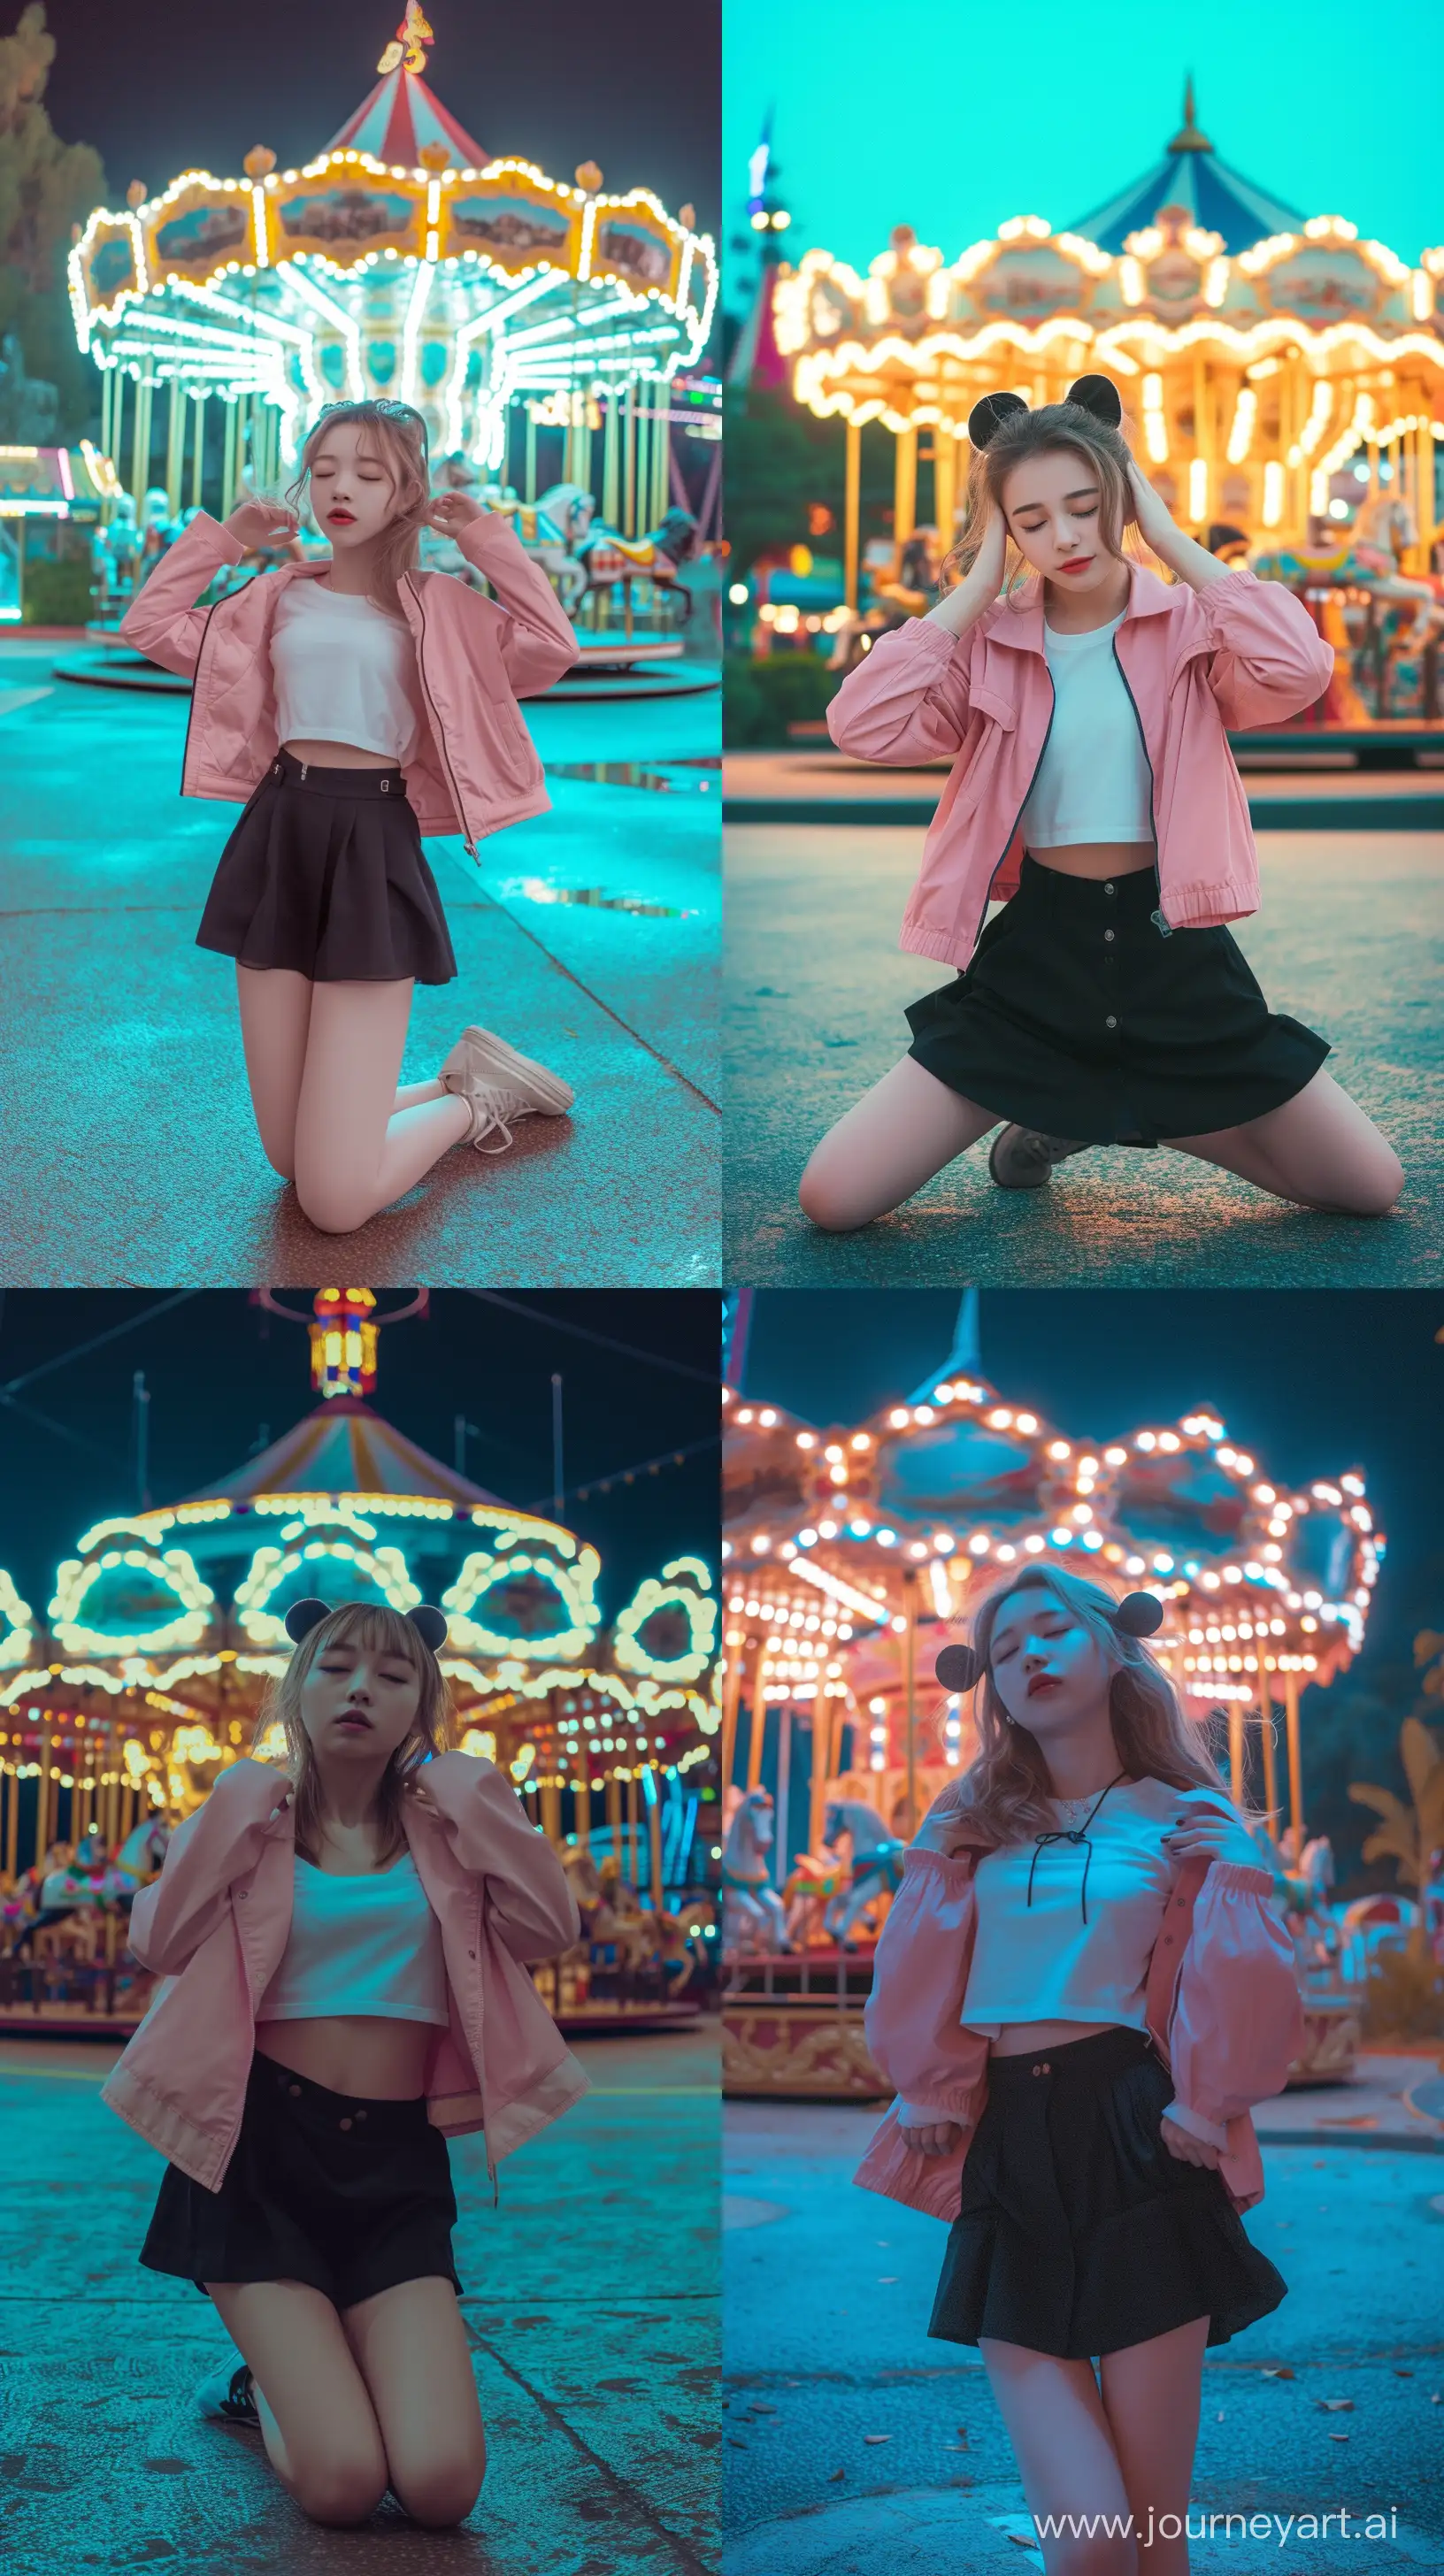 Adorable-American-Girl-Playing-in-Neonlit-Amusement-Park-at-Night